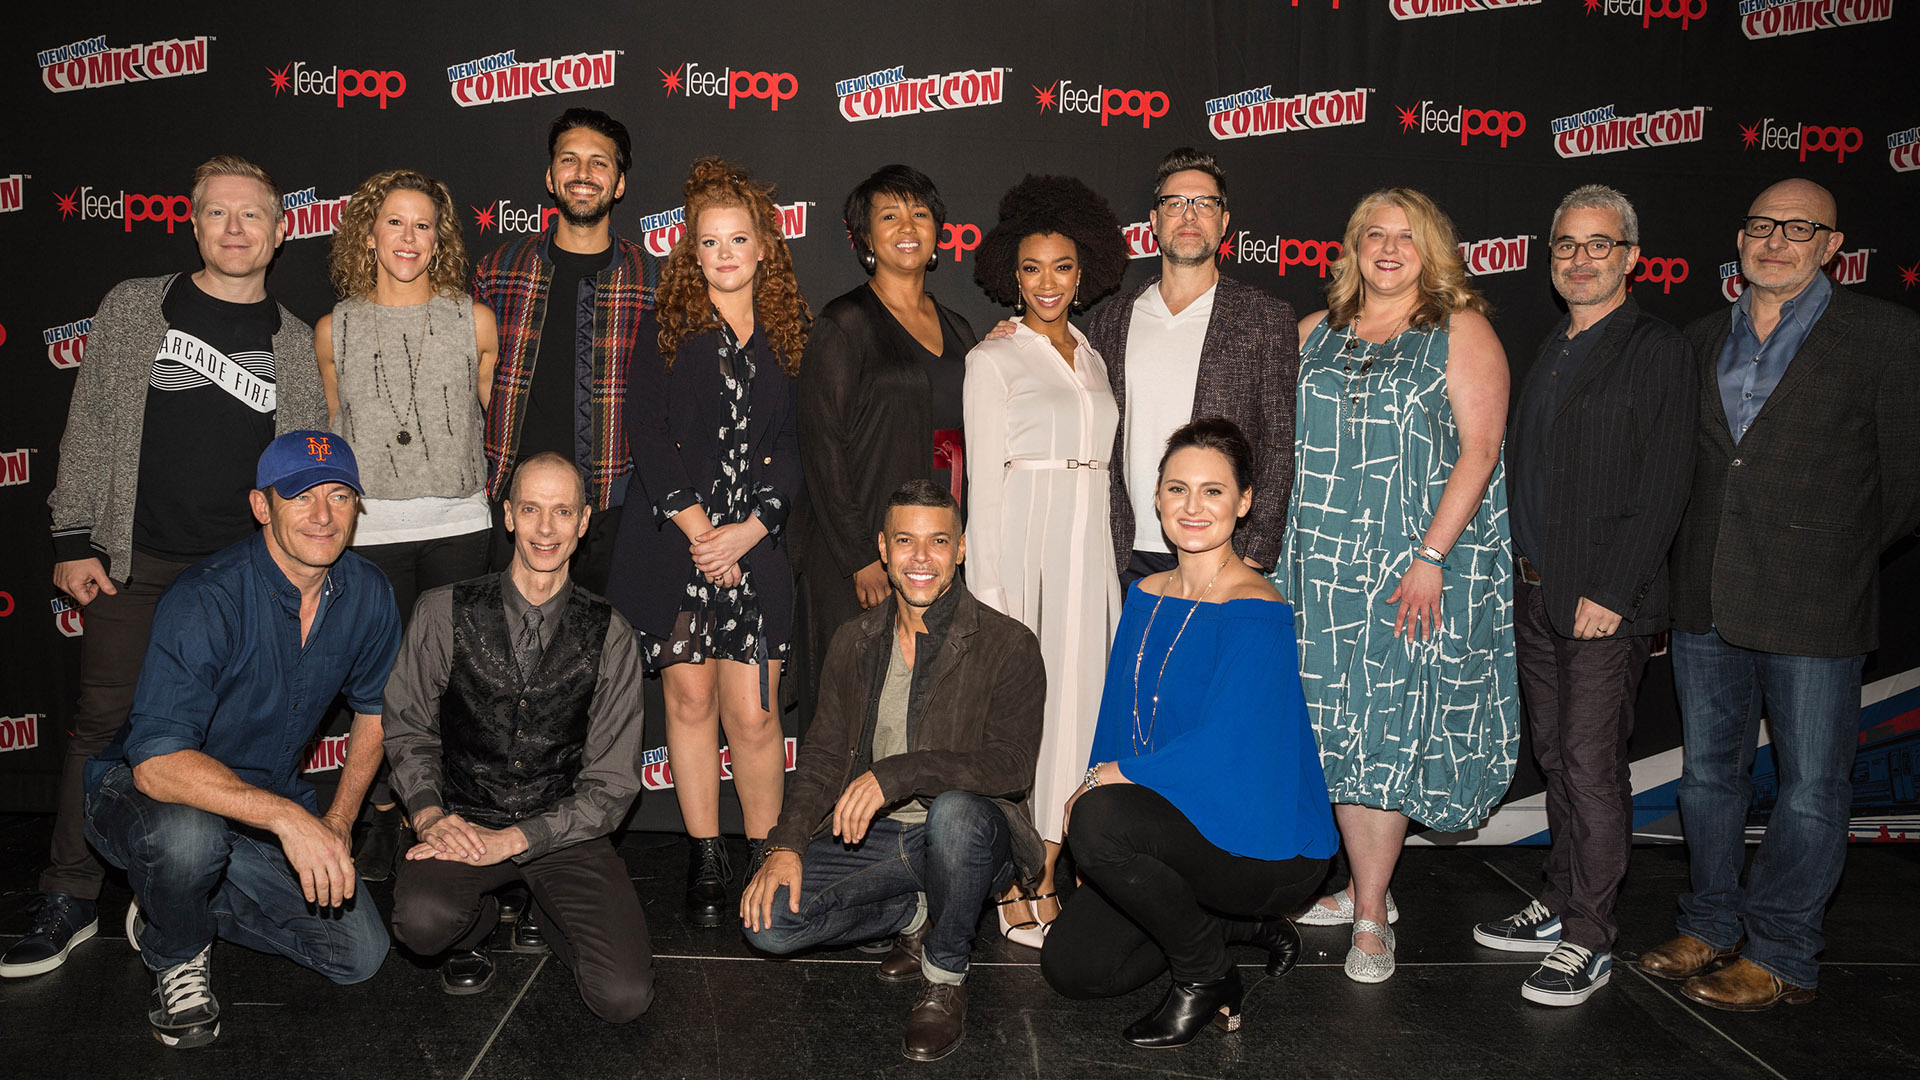 Star Trek: Discovery's cast and crew came out in full force at the